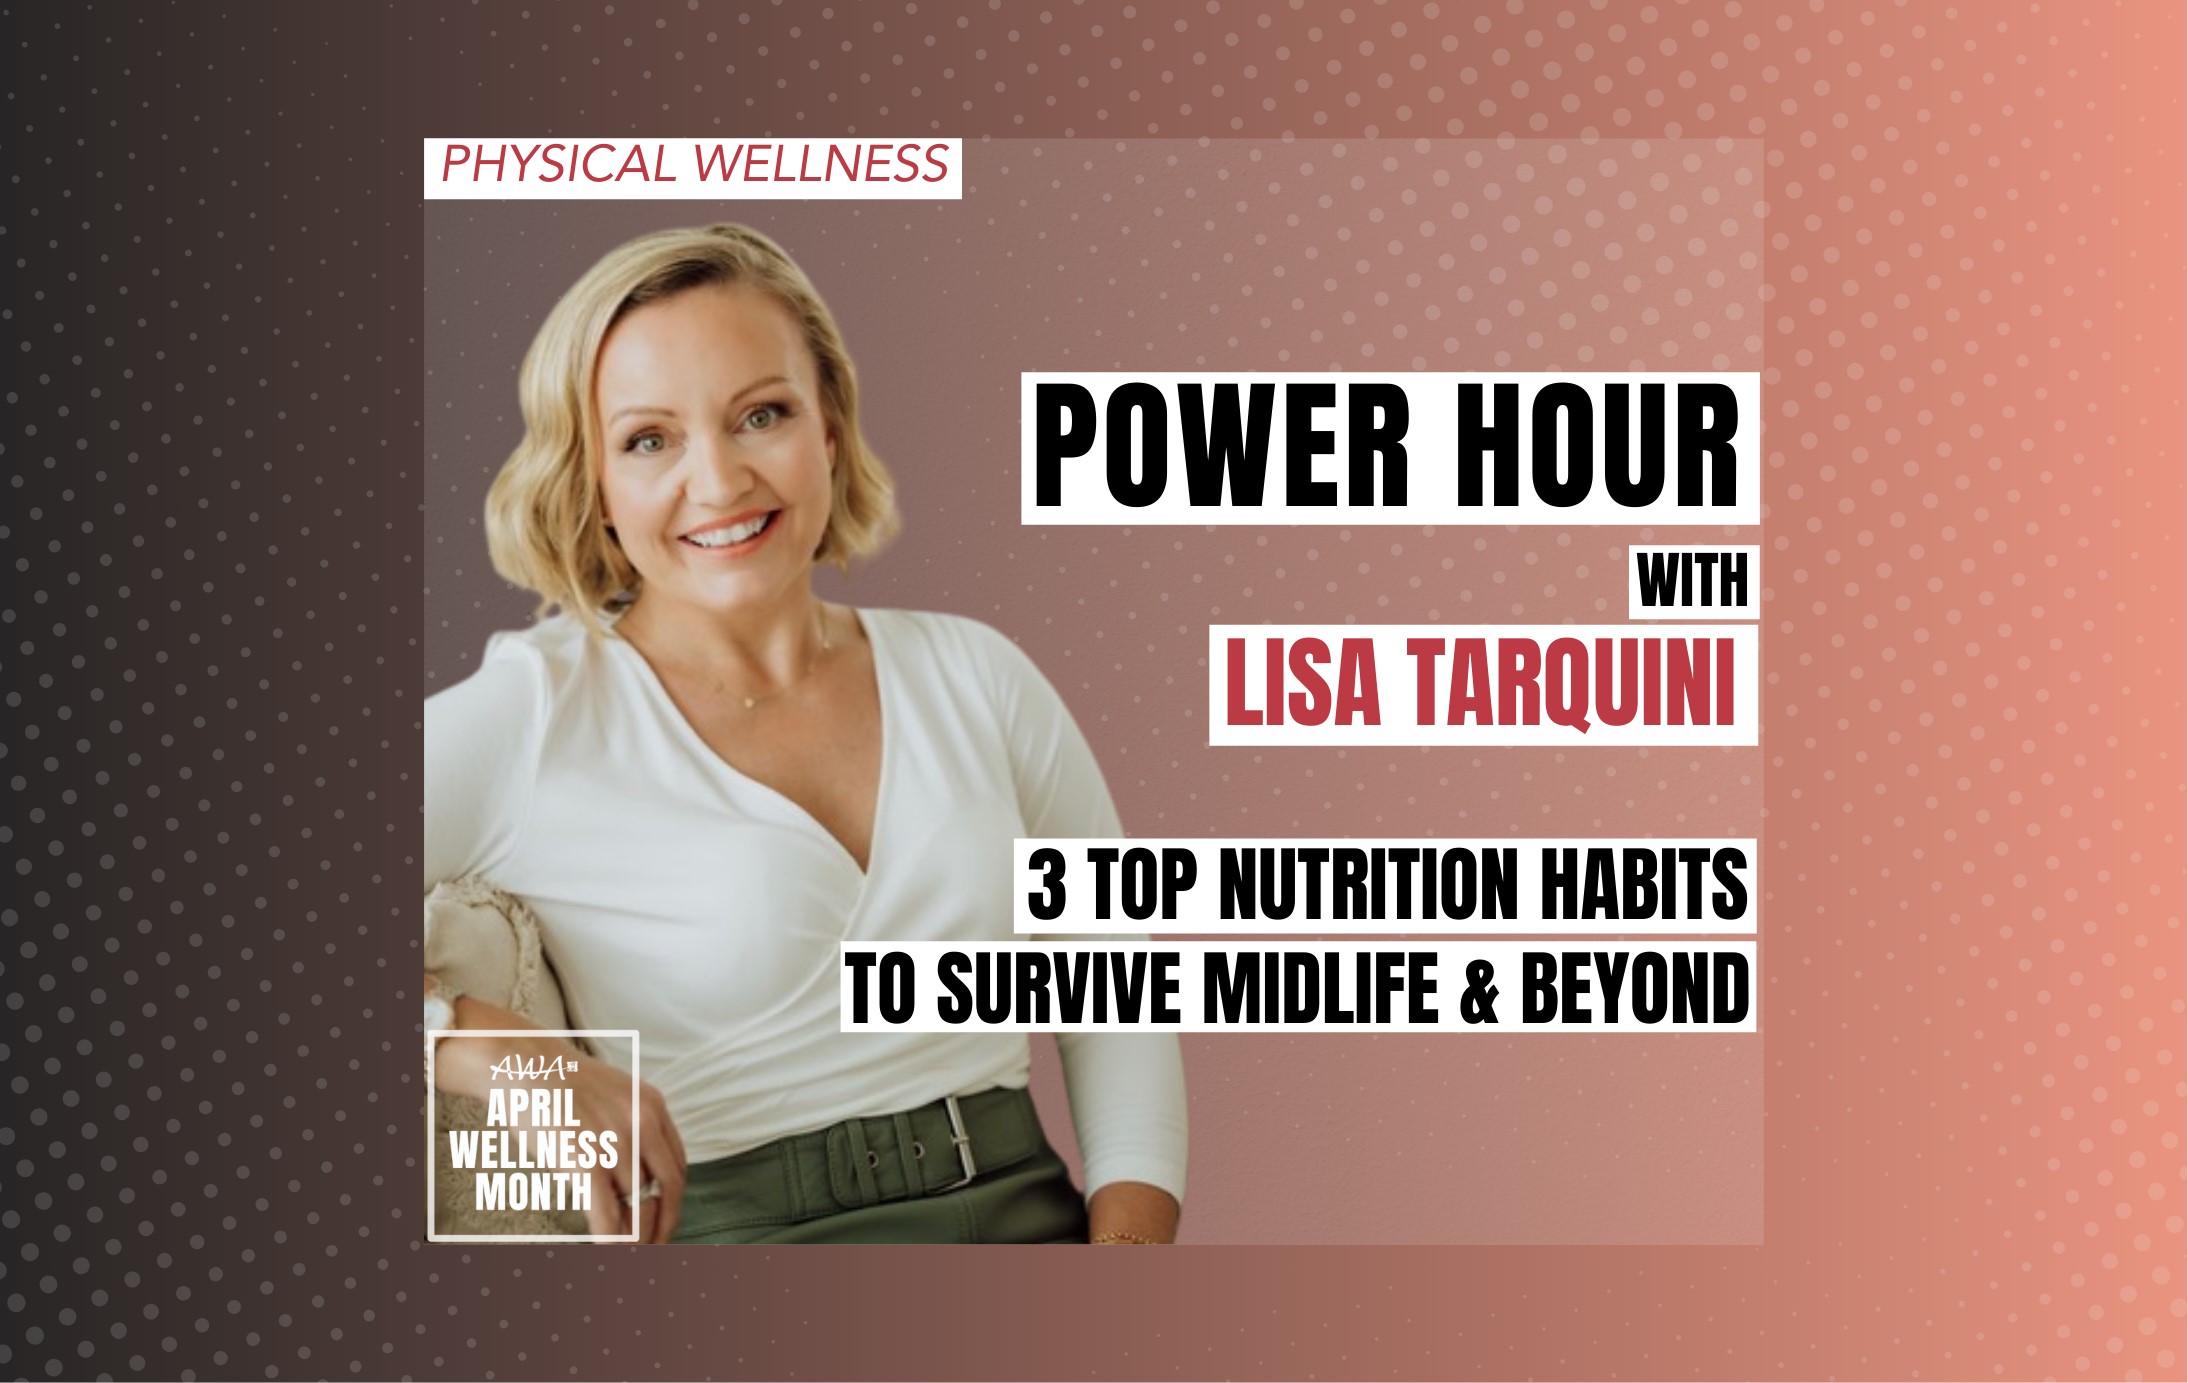 Power Hour with Lisa Tarquini: 3 Top Nutrition Habits to Survive Midlife & Beyond